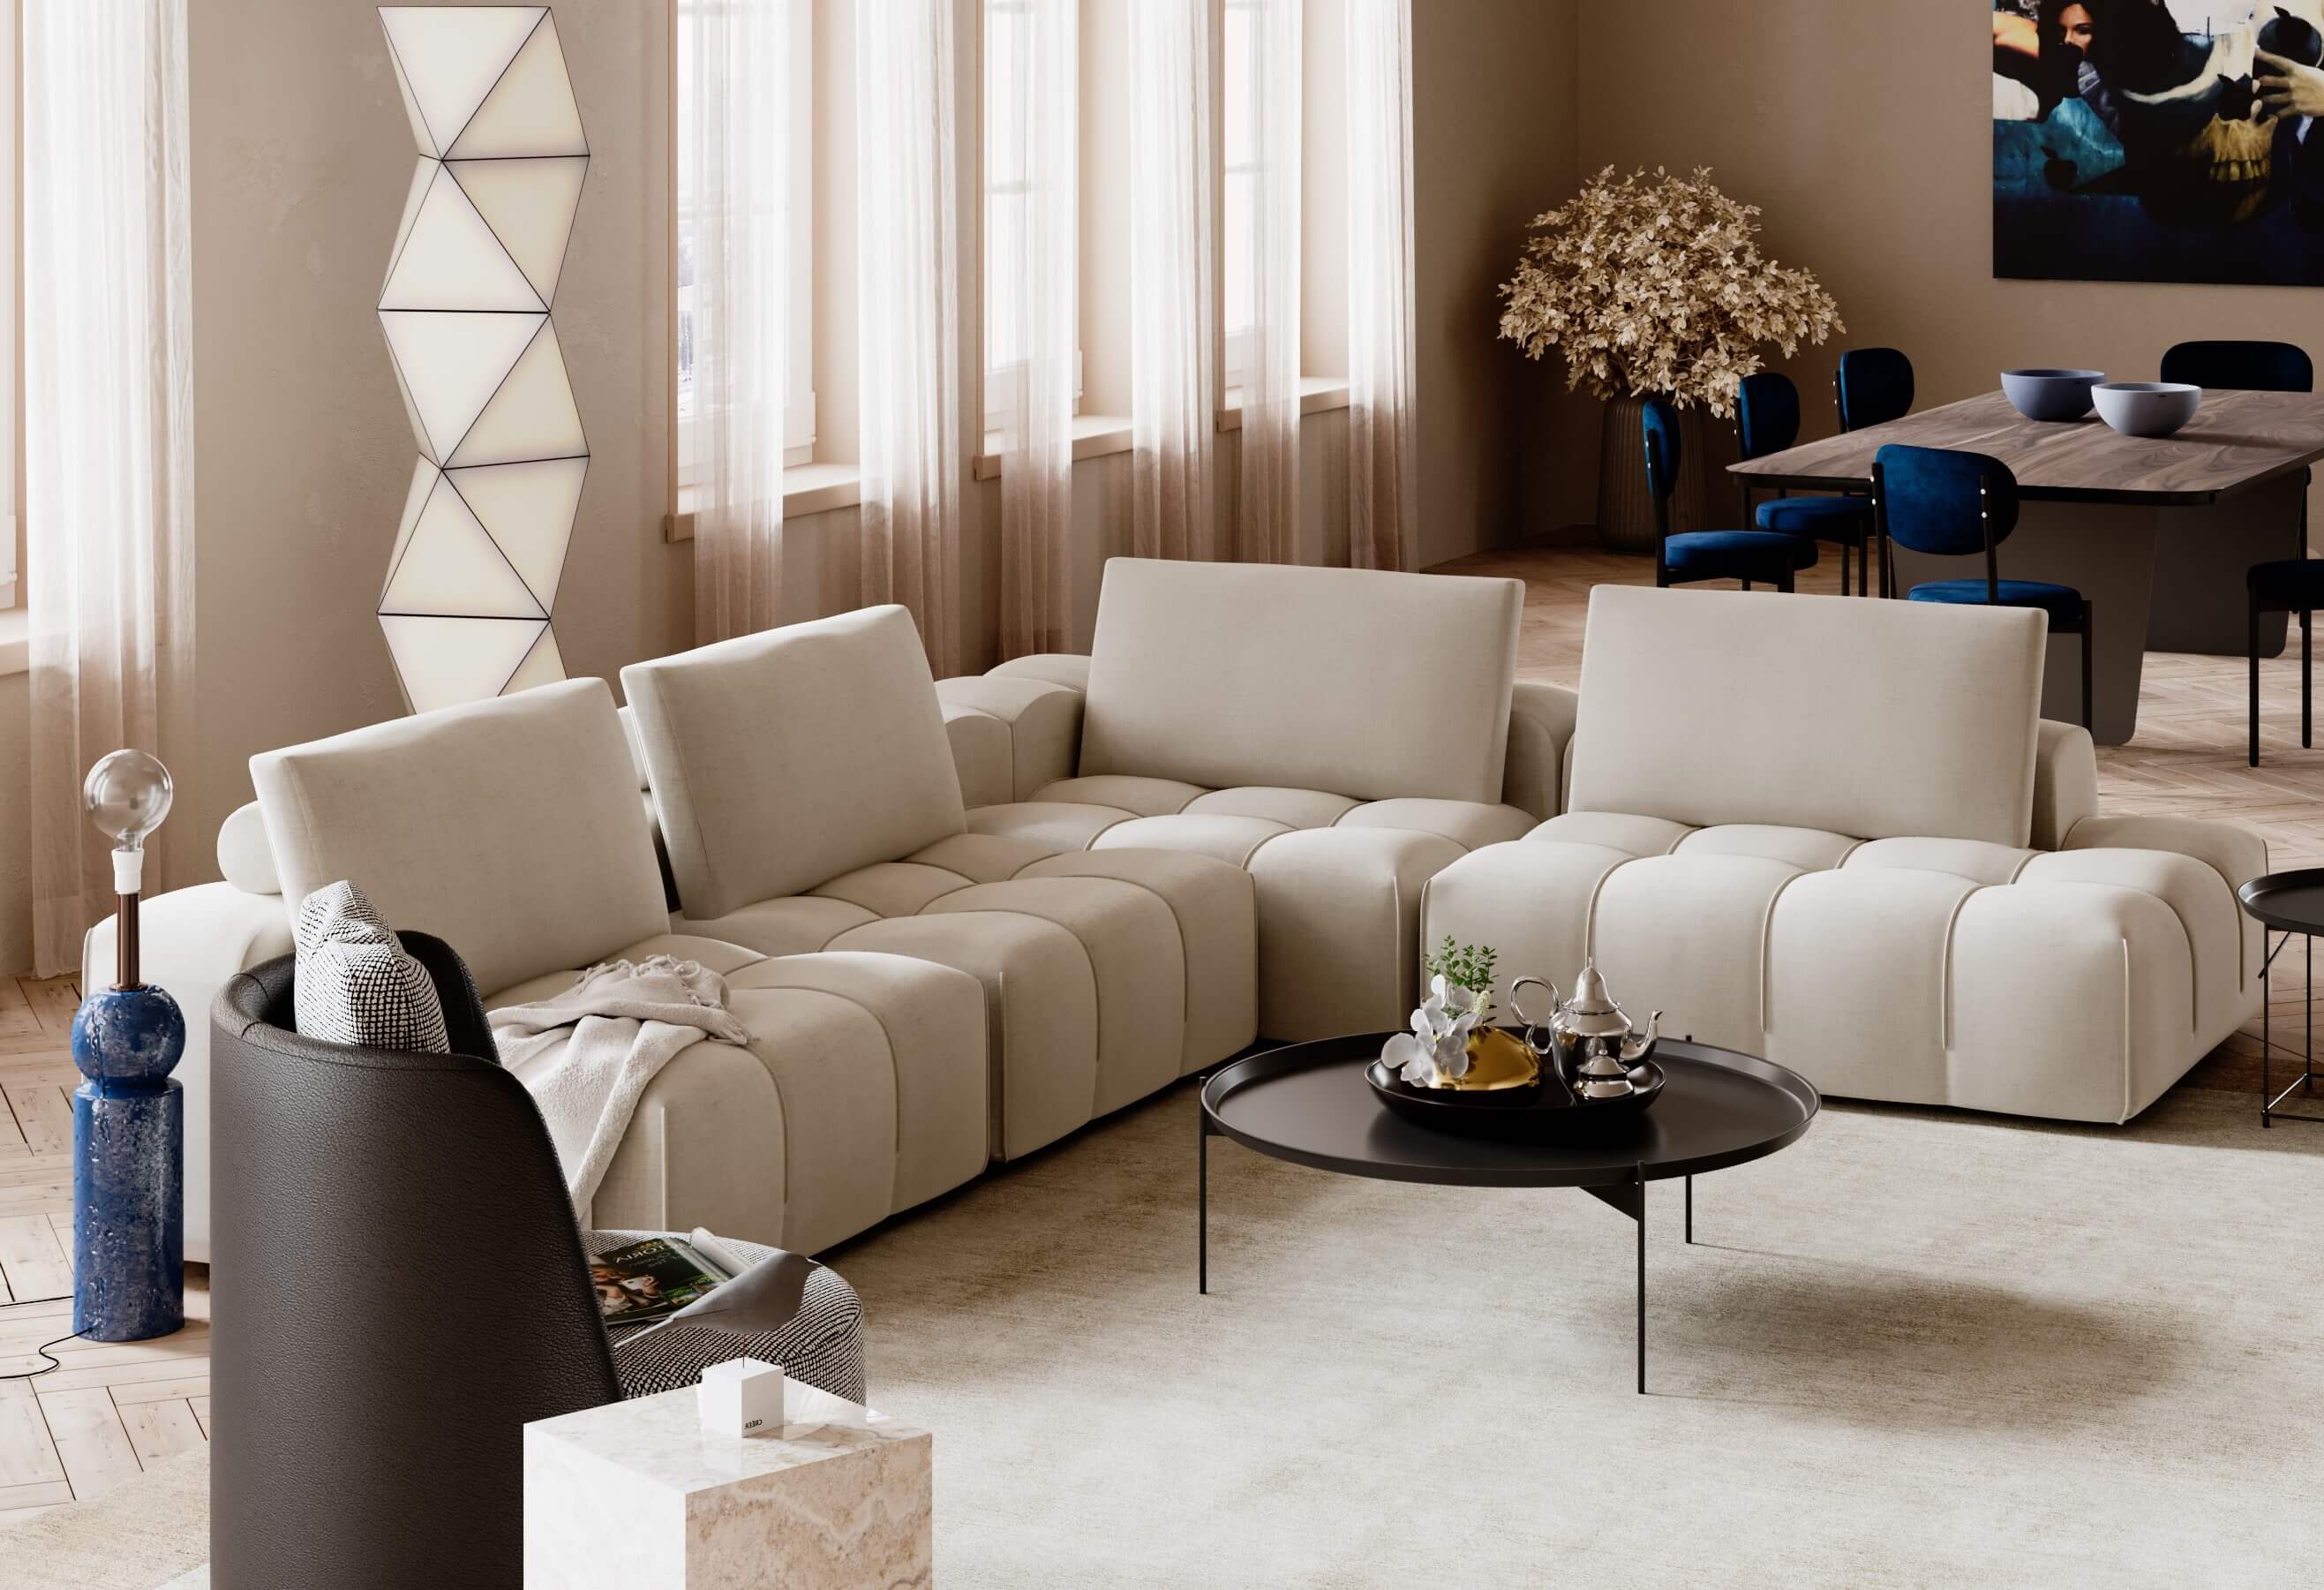 Lanube L-Seat Sofa: A sophisticated, comfortable L-shaped design with high-quality materials.